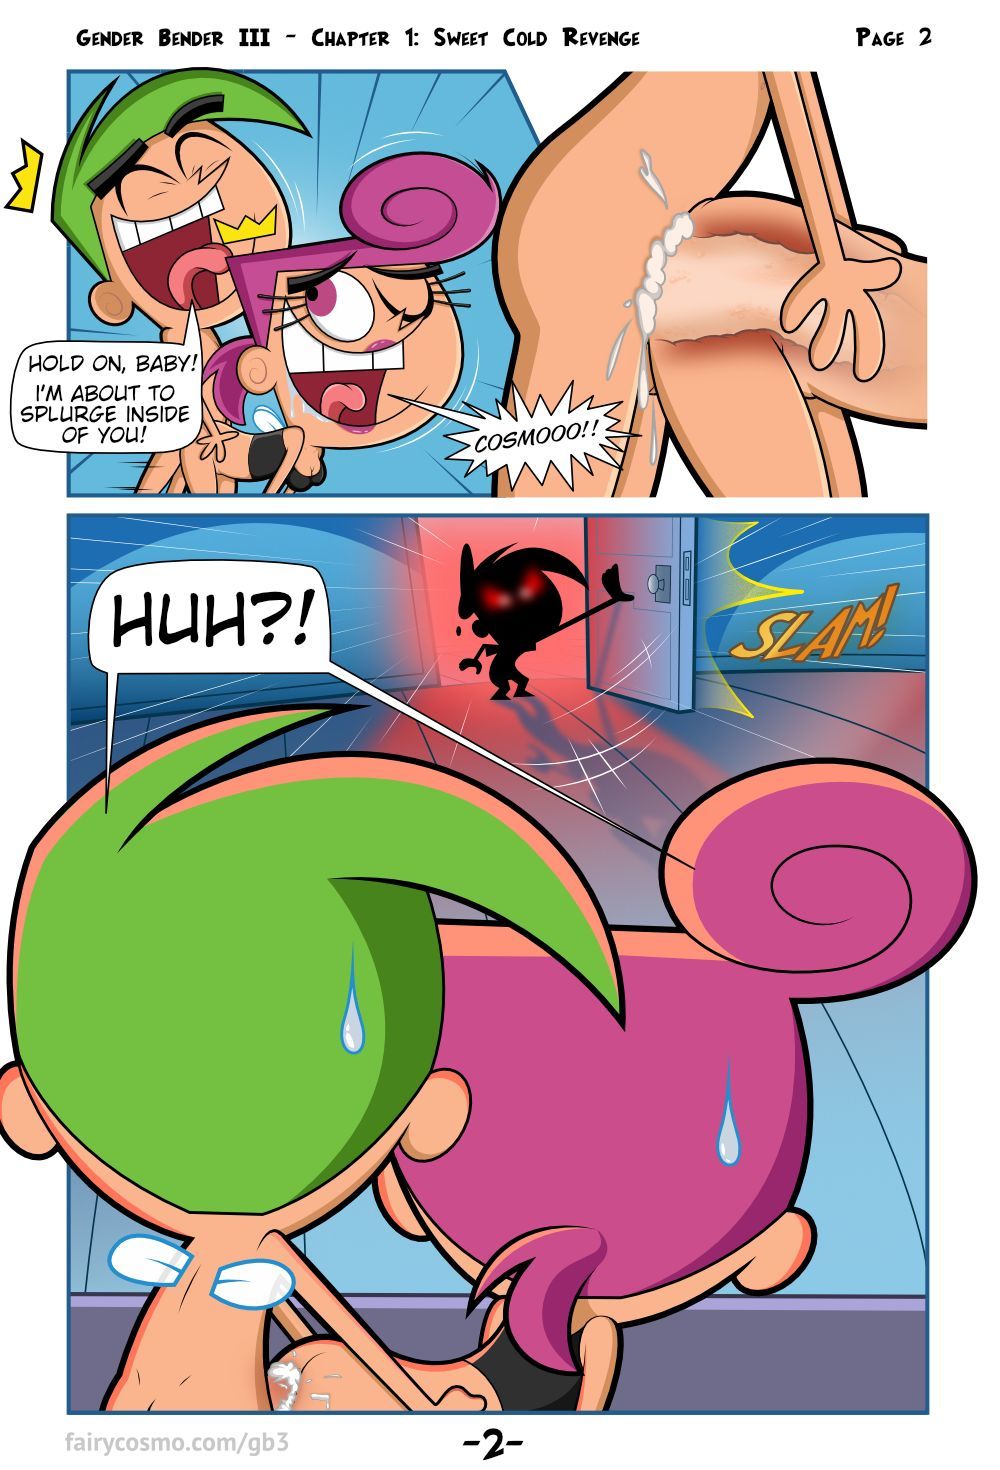 Gender Bender III Fairly Odd Parents by FairyCosmo page 3